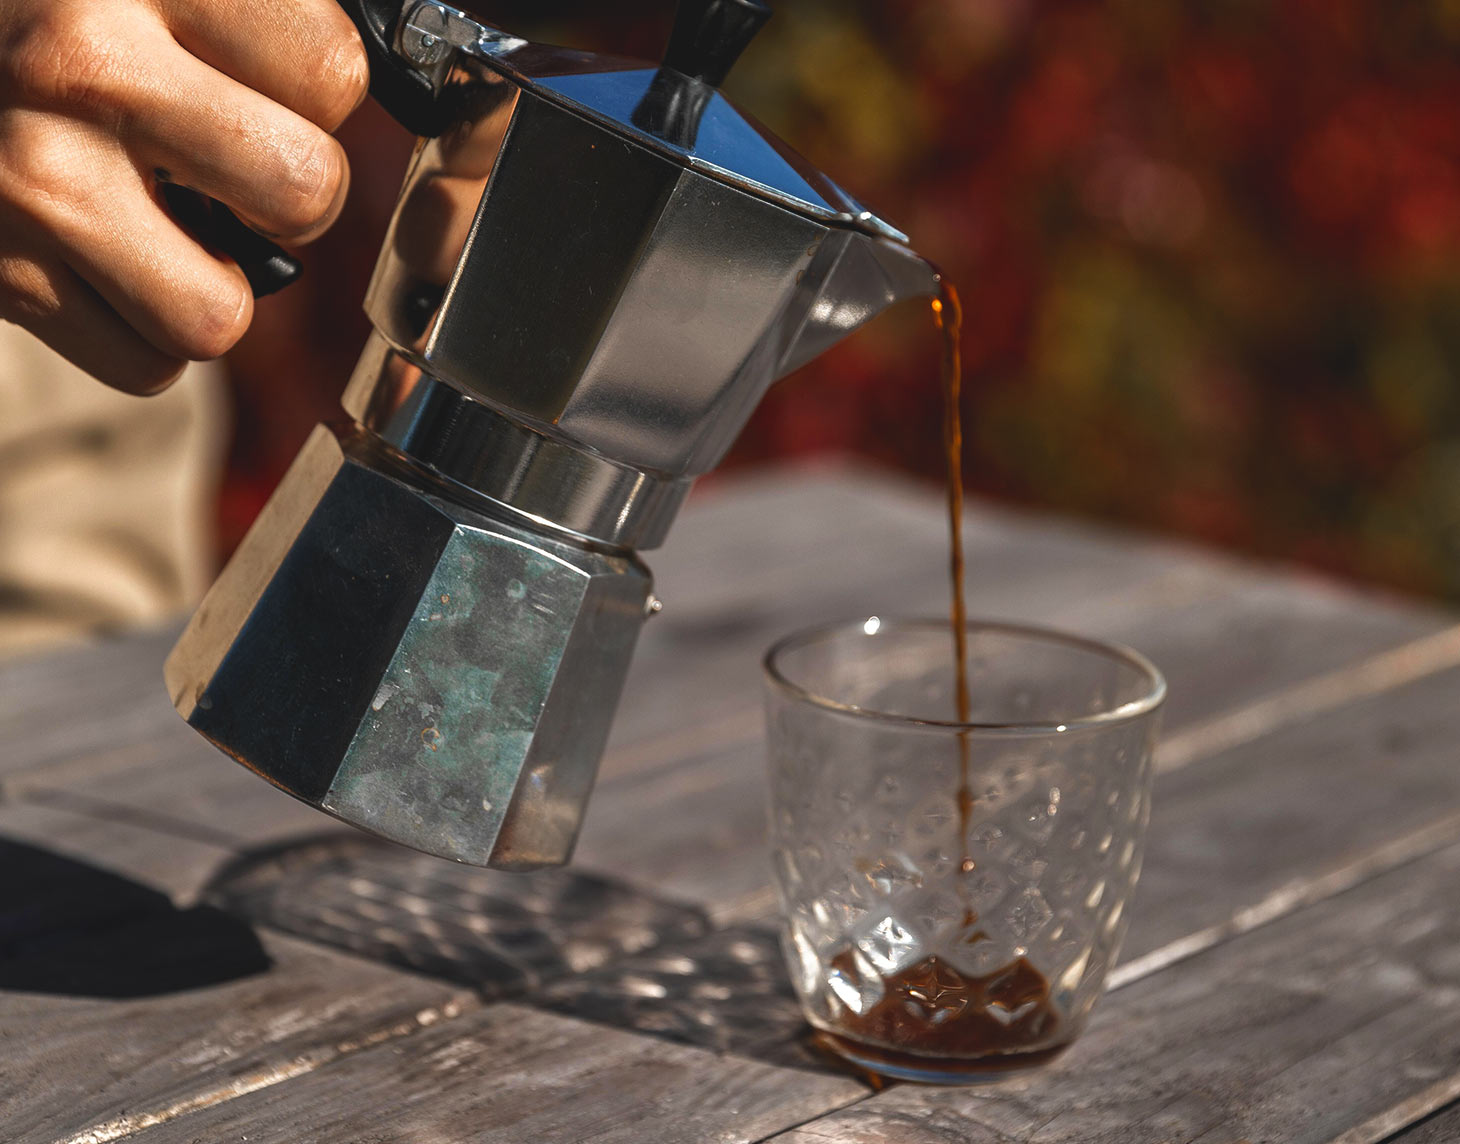 How to Make Espresso at Home — With or Without a Machine